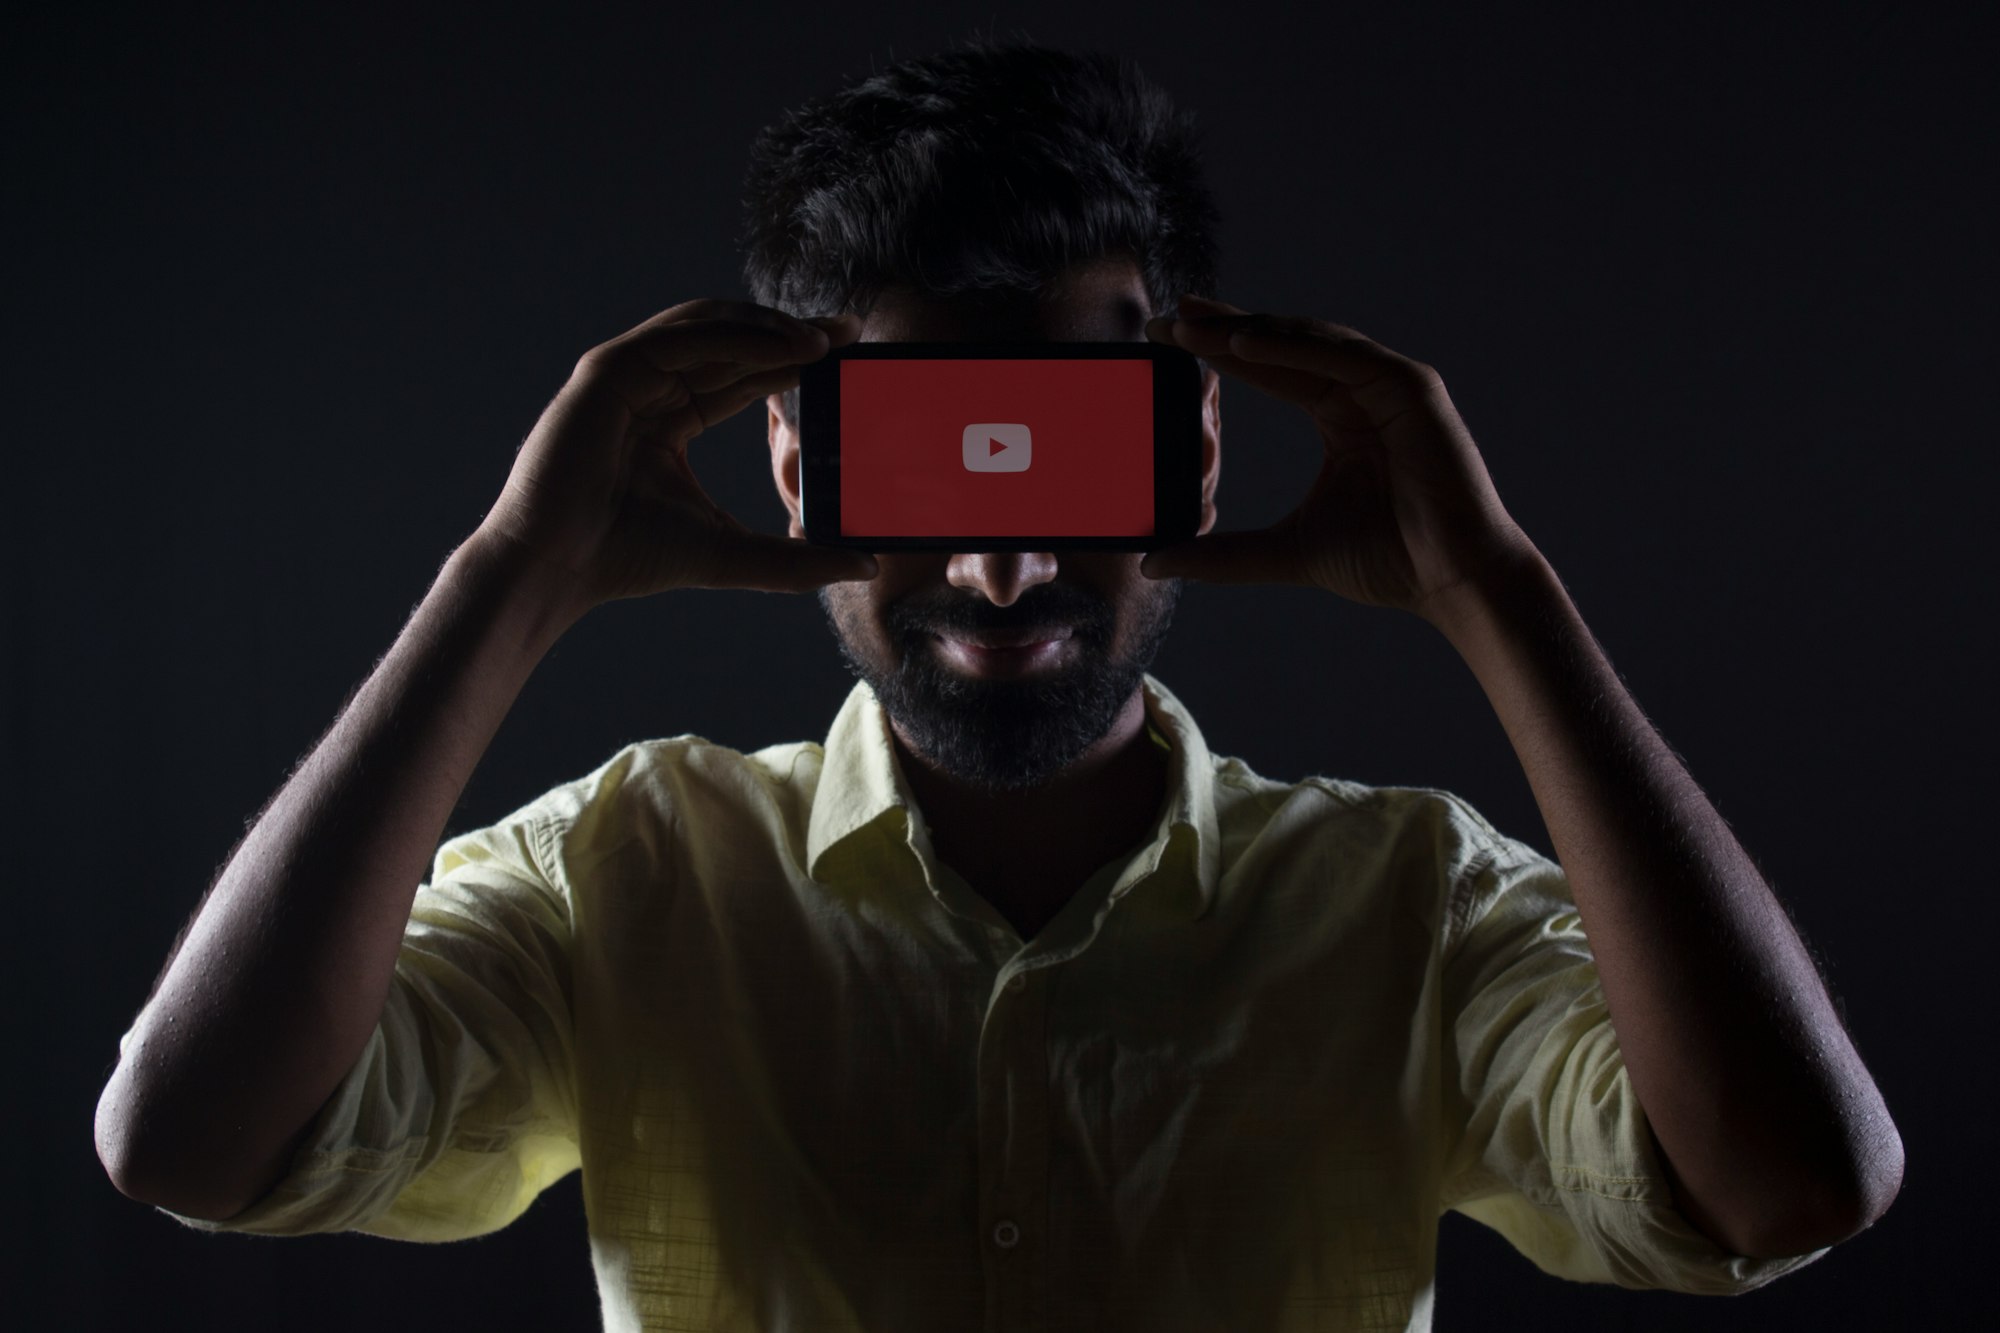 YouTube is testing an online gaming service